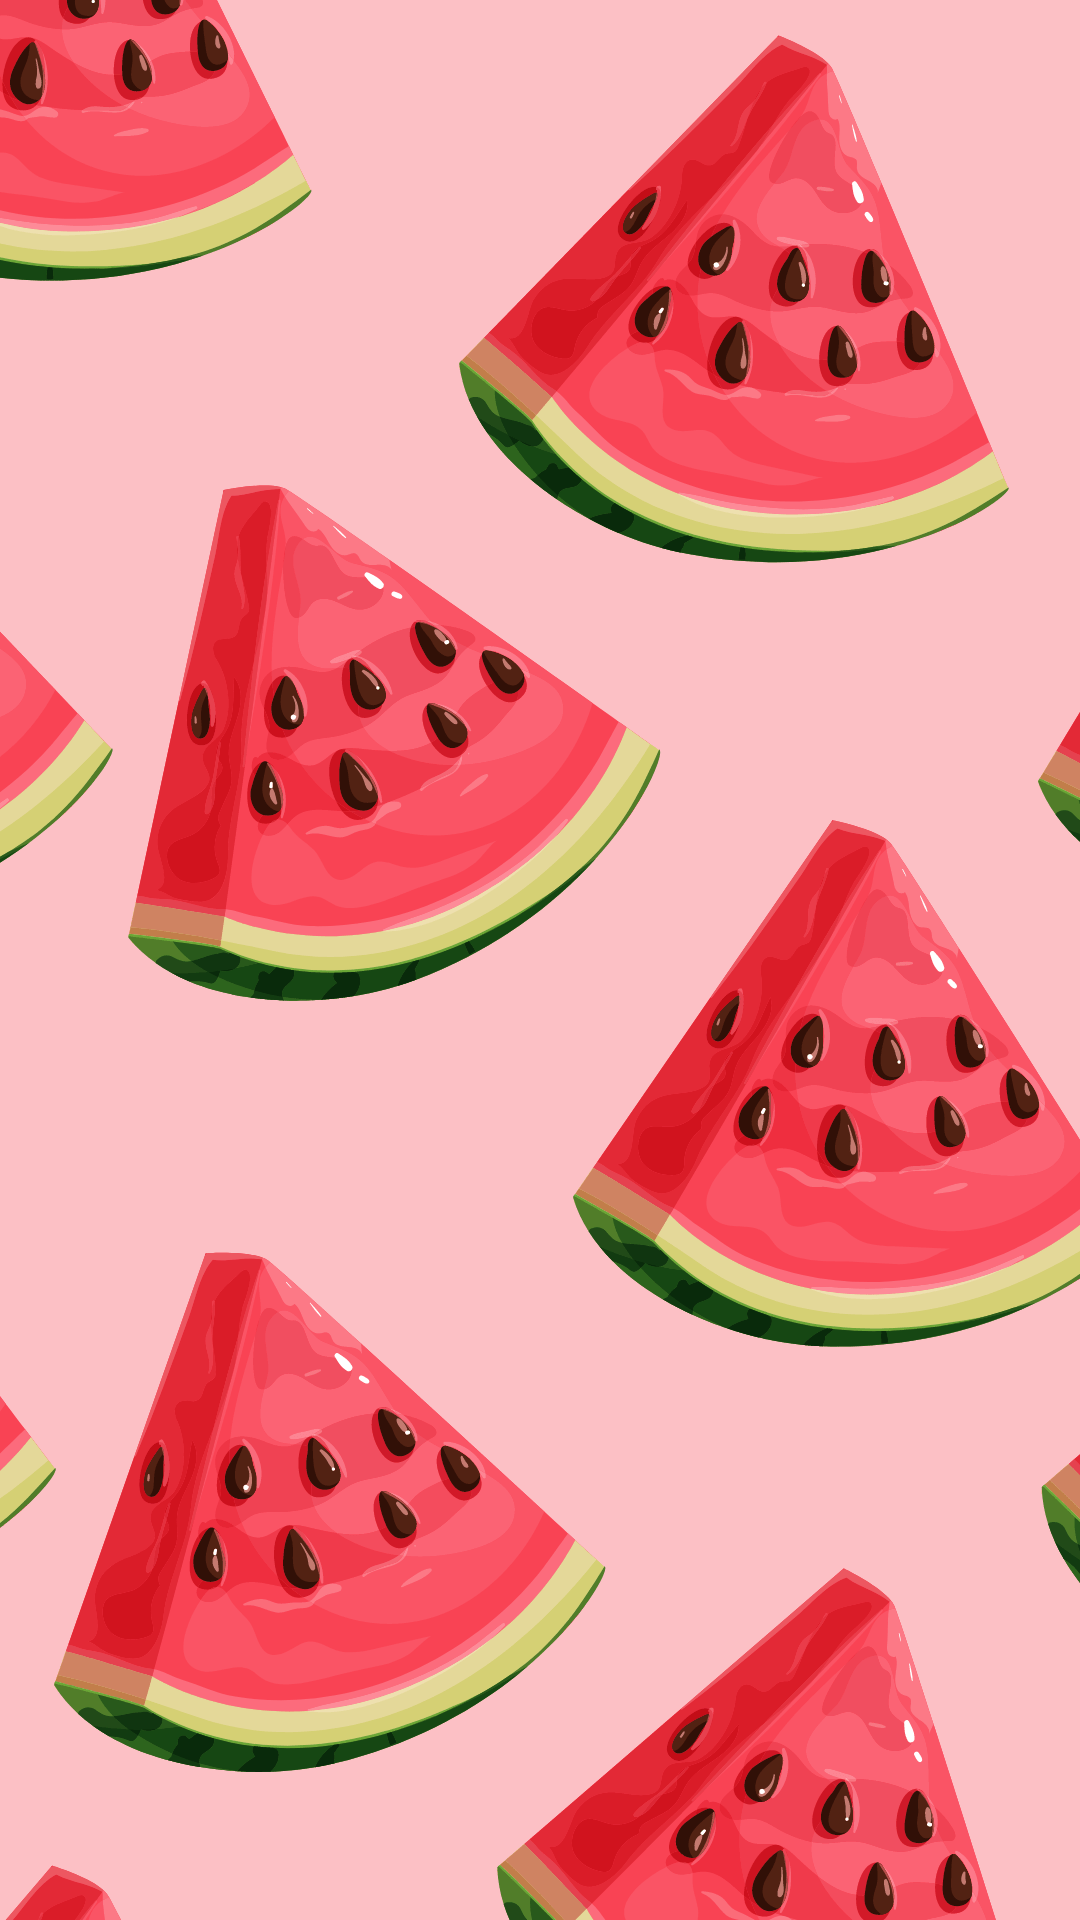 A pattern of watermelon slices on a pink background - Watermelon, fruit, 3D